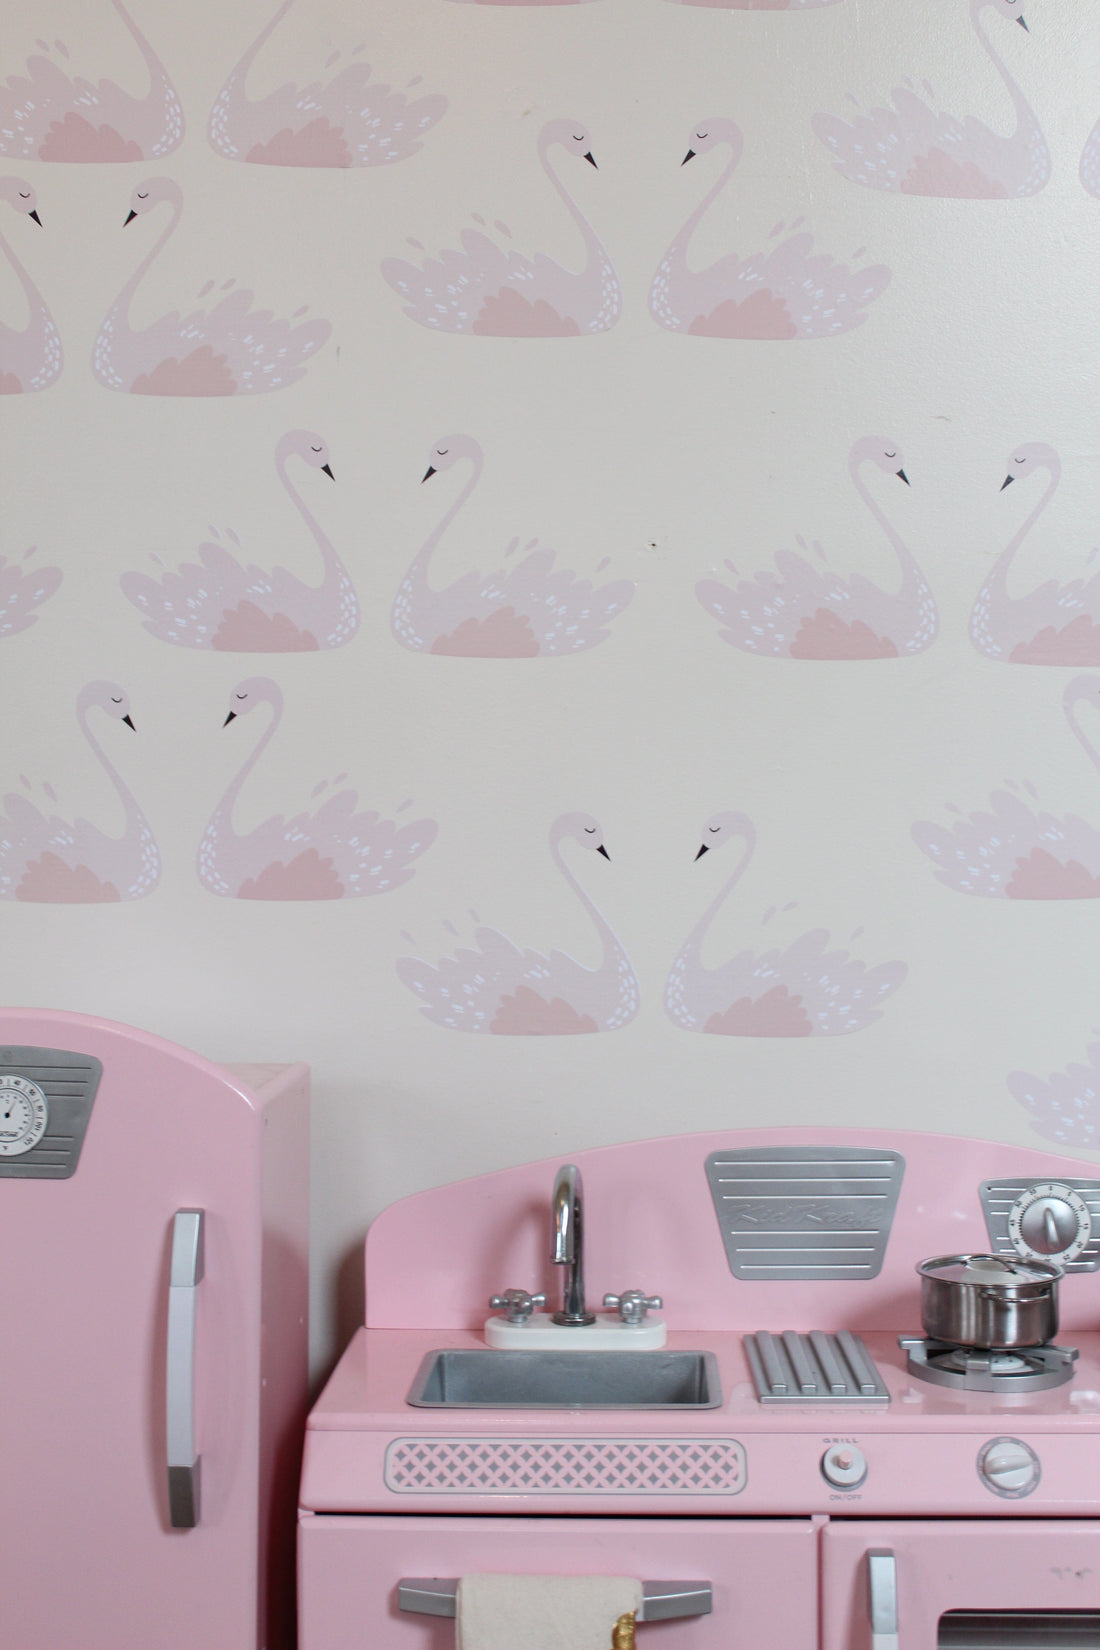 Two Ways to use our Swan Decals!